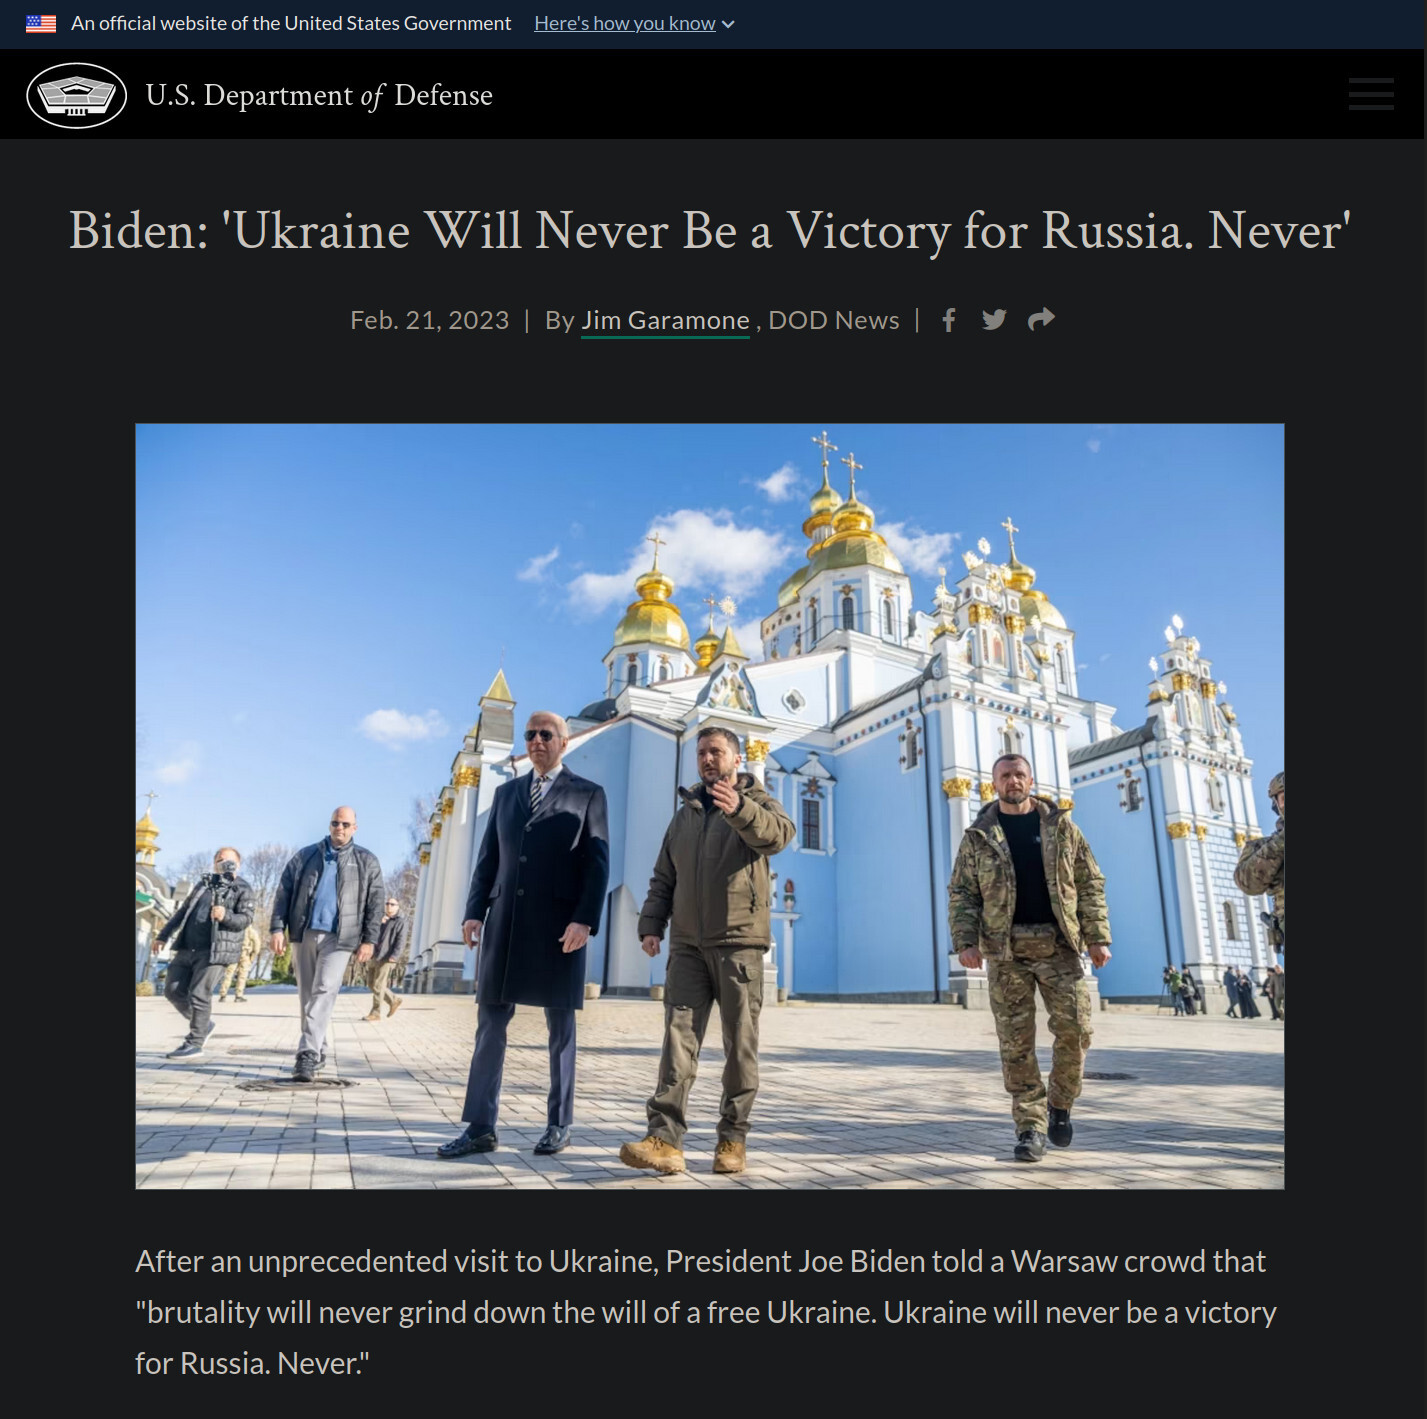 Biden: Ukraine will never be a victory for Russia